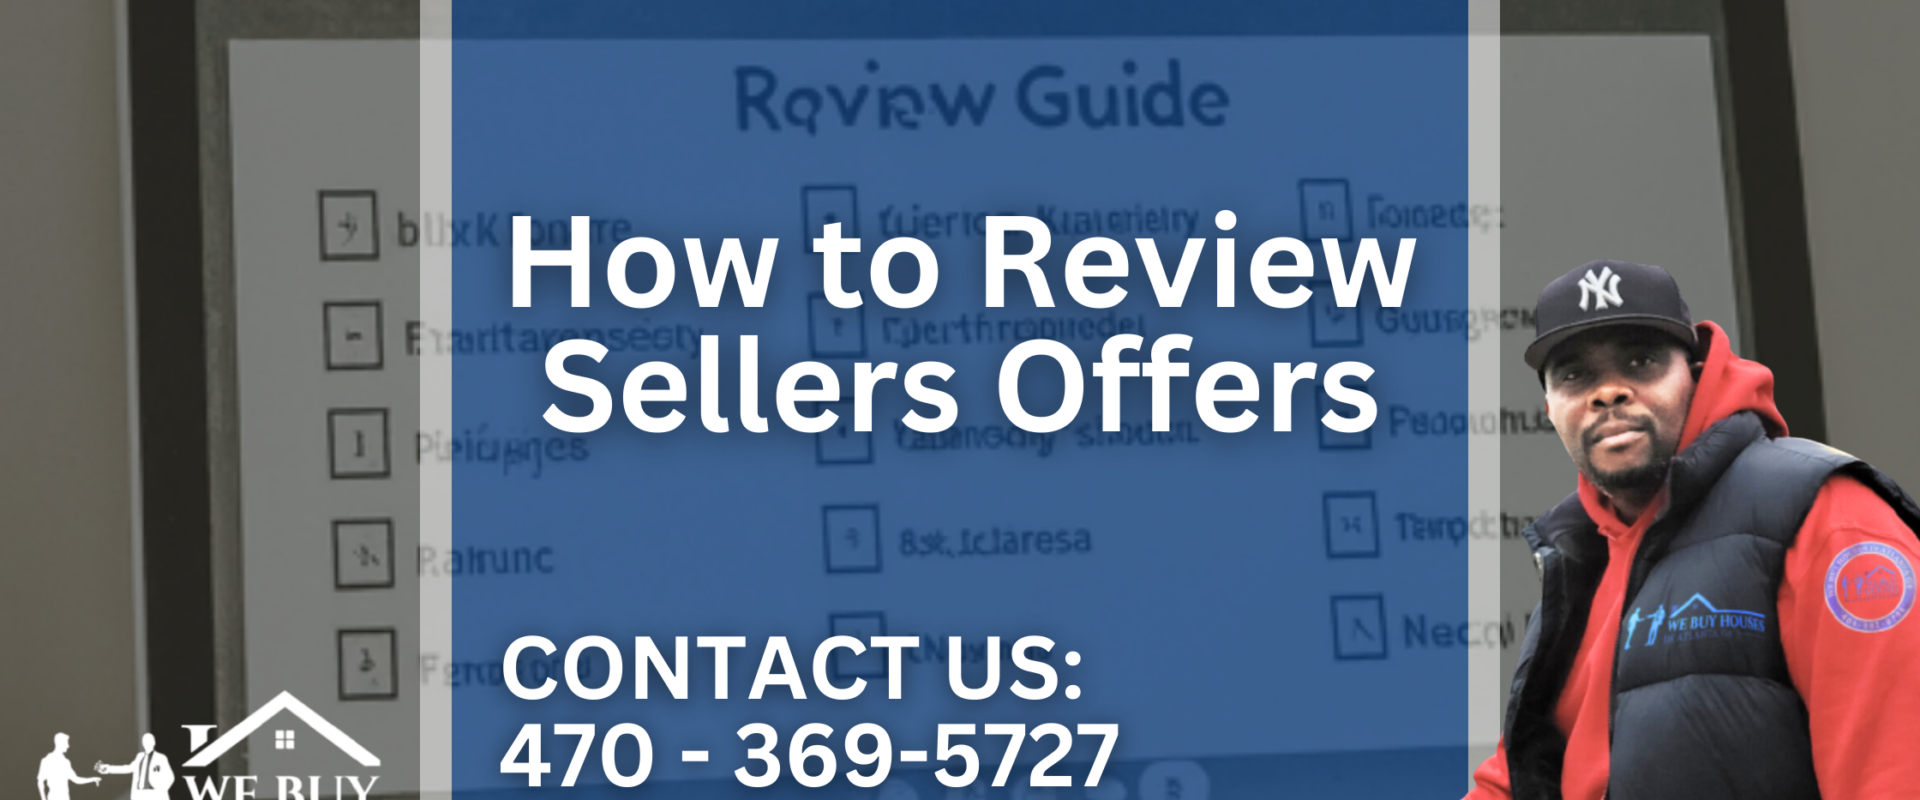 How to Review Sellers Offers